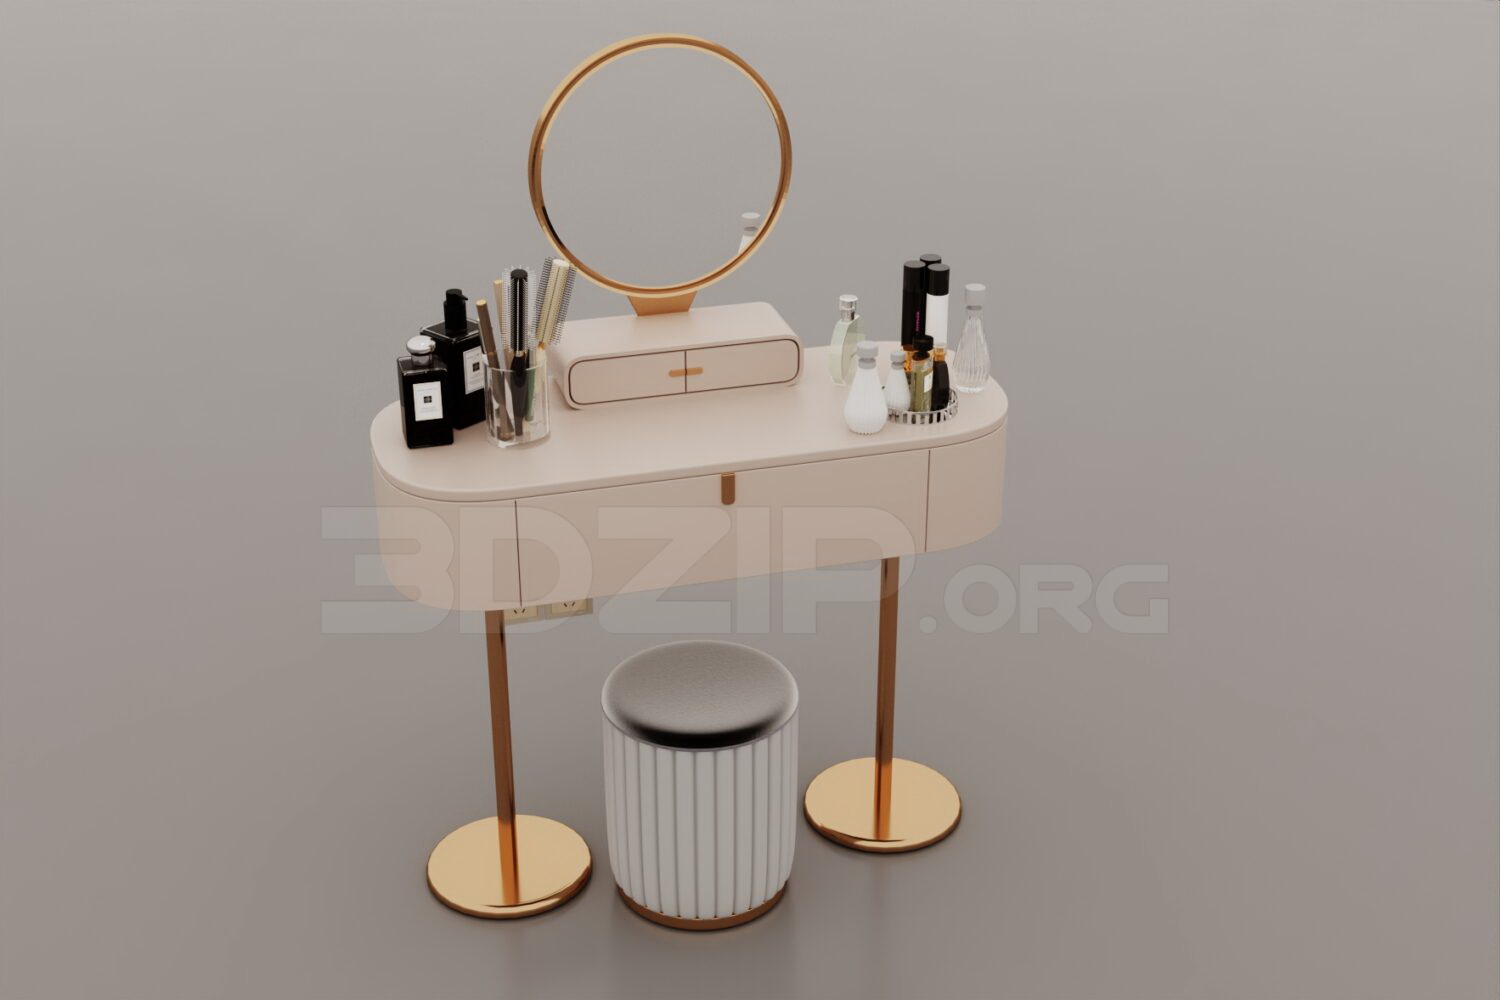 2082. Download Free Dressing Table Model By Huy Hieu Lee